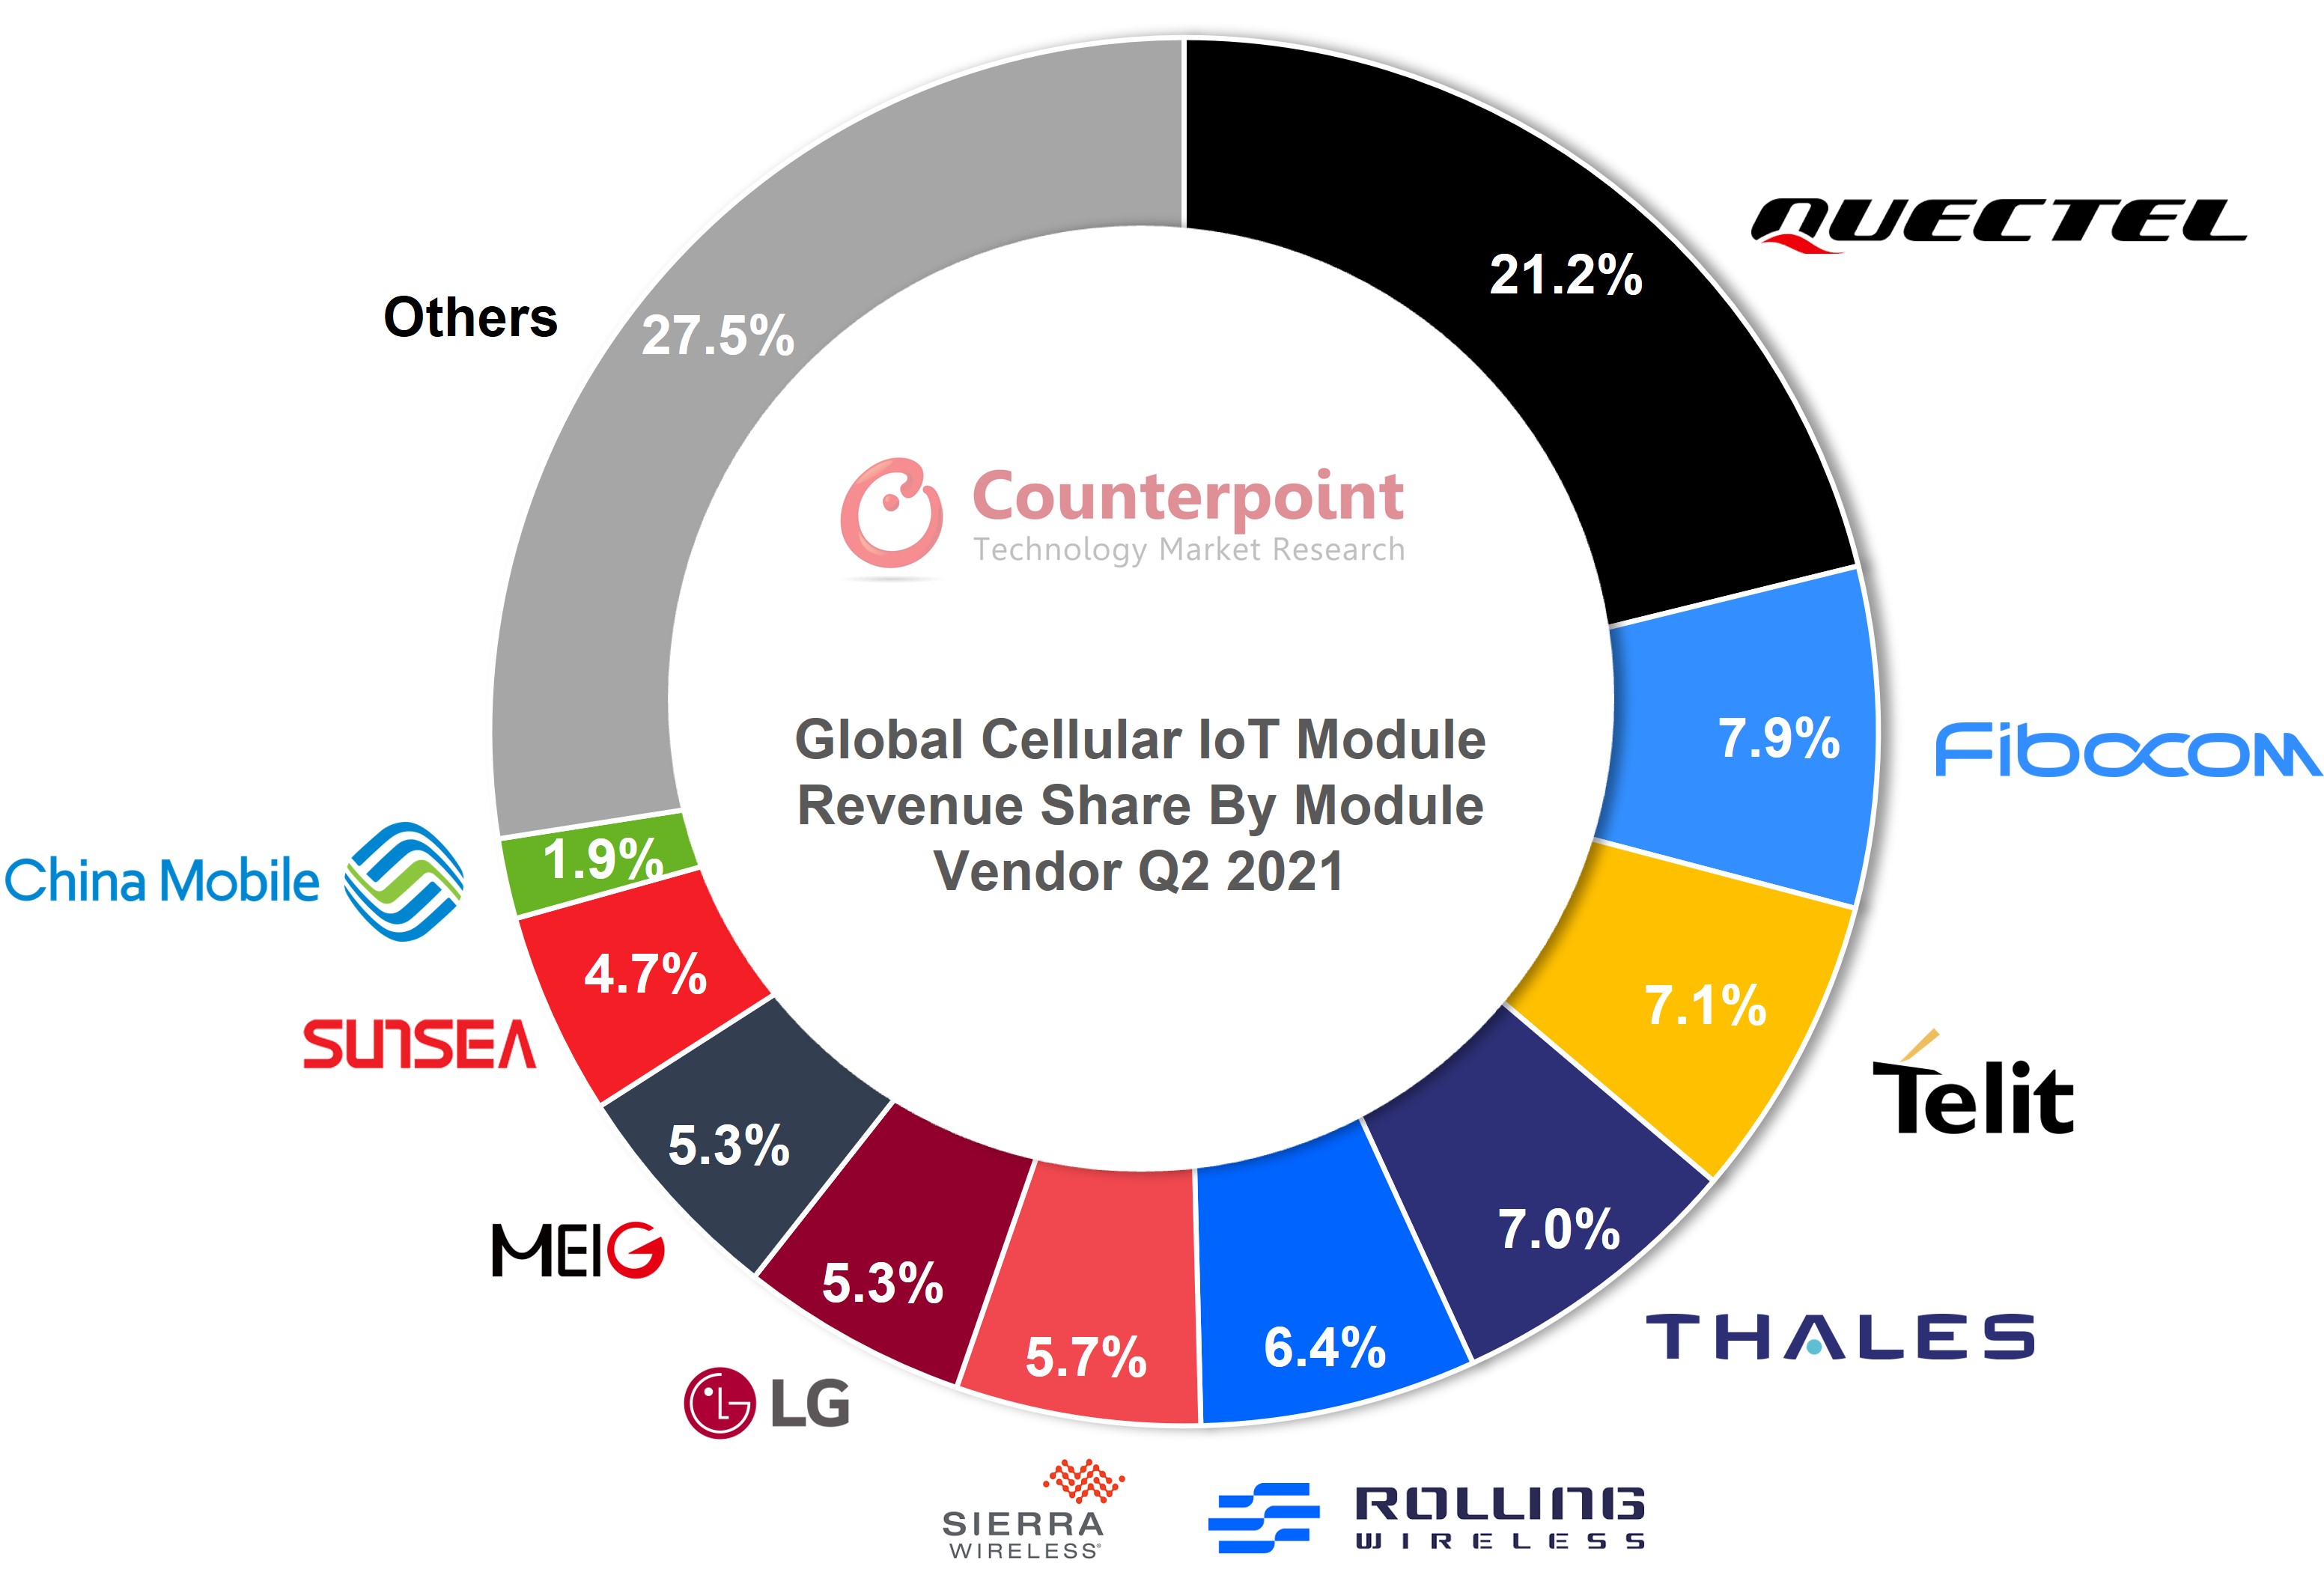 Counterpoint Cellular IoT Module Market Share by Module Vendor Q2 2021